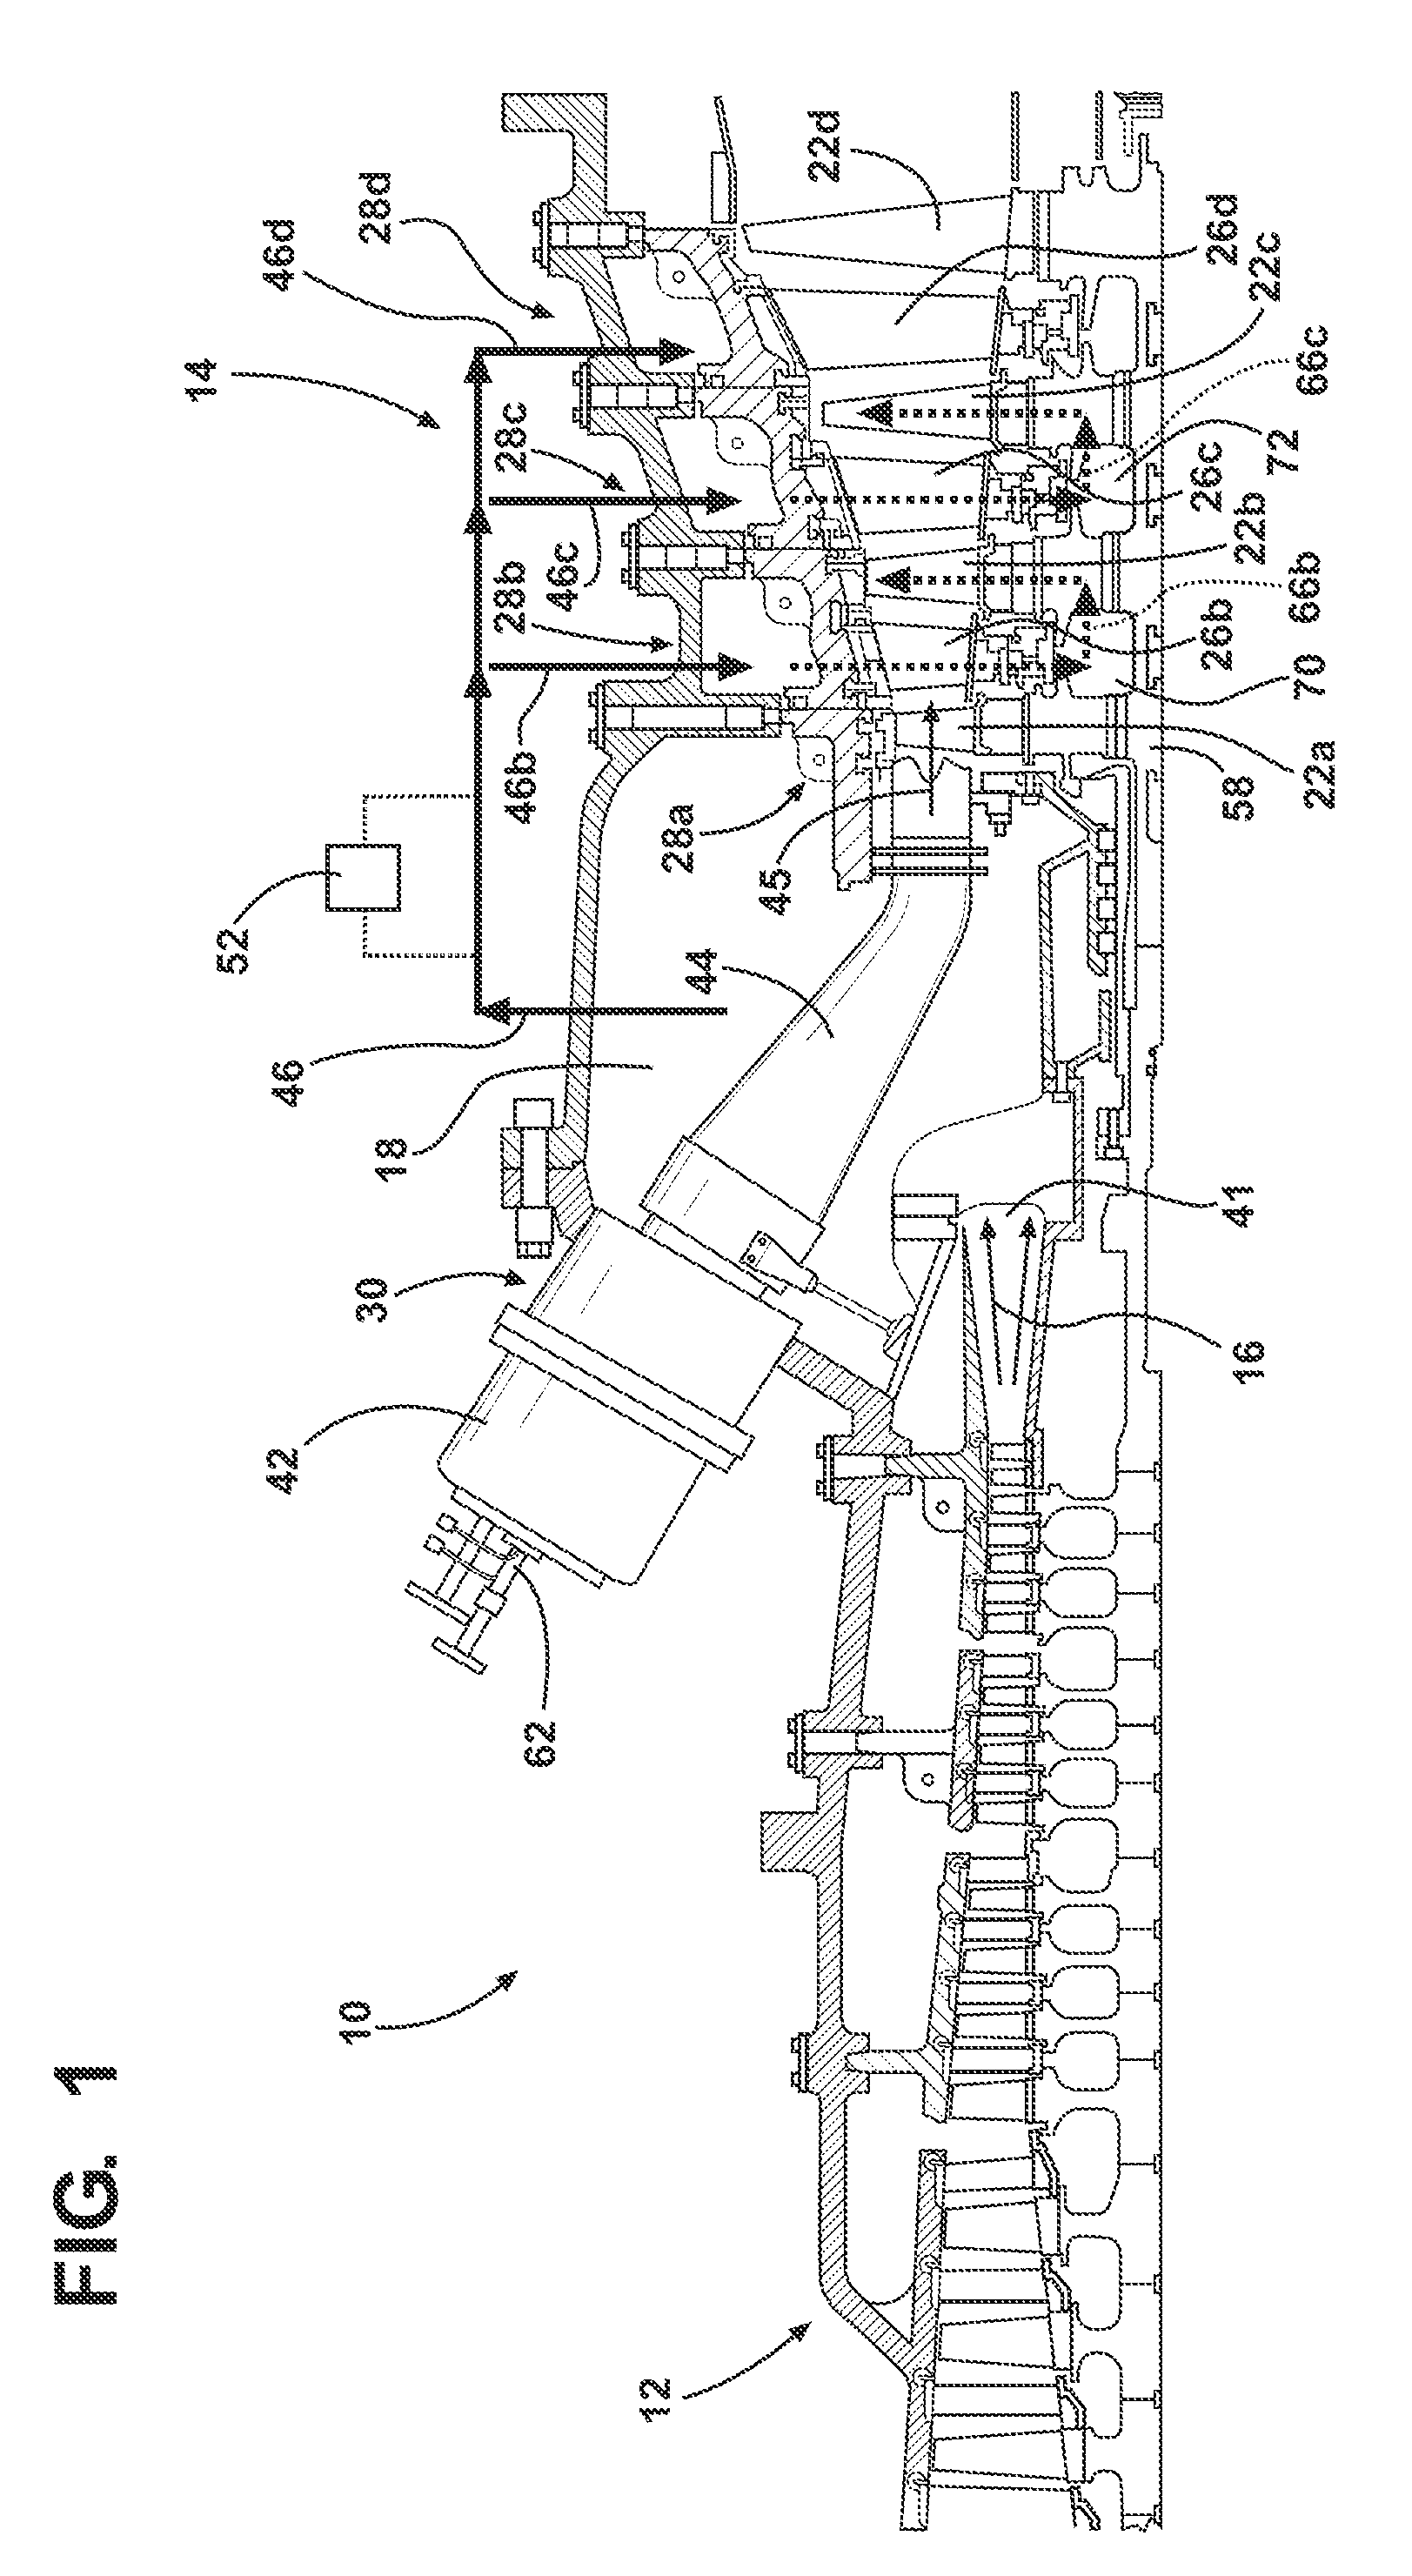 Cooling of Turbine Components Using Combustor Shell Air